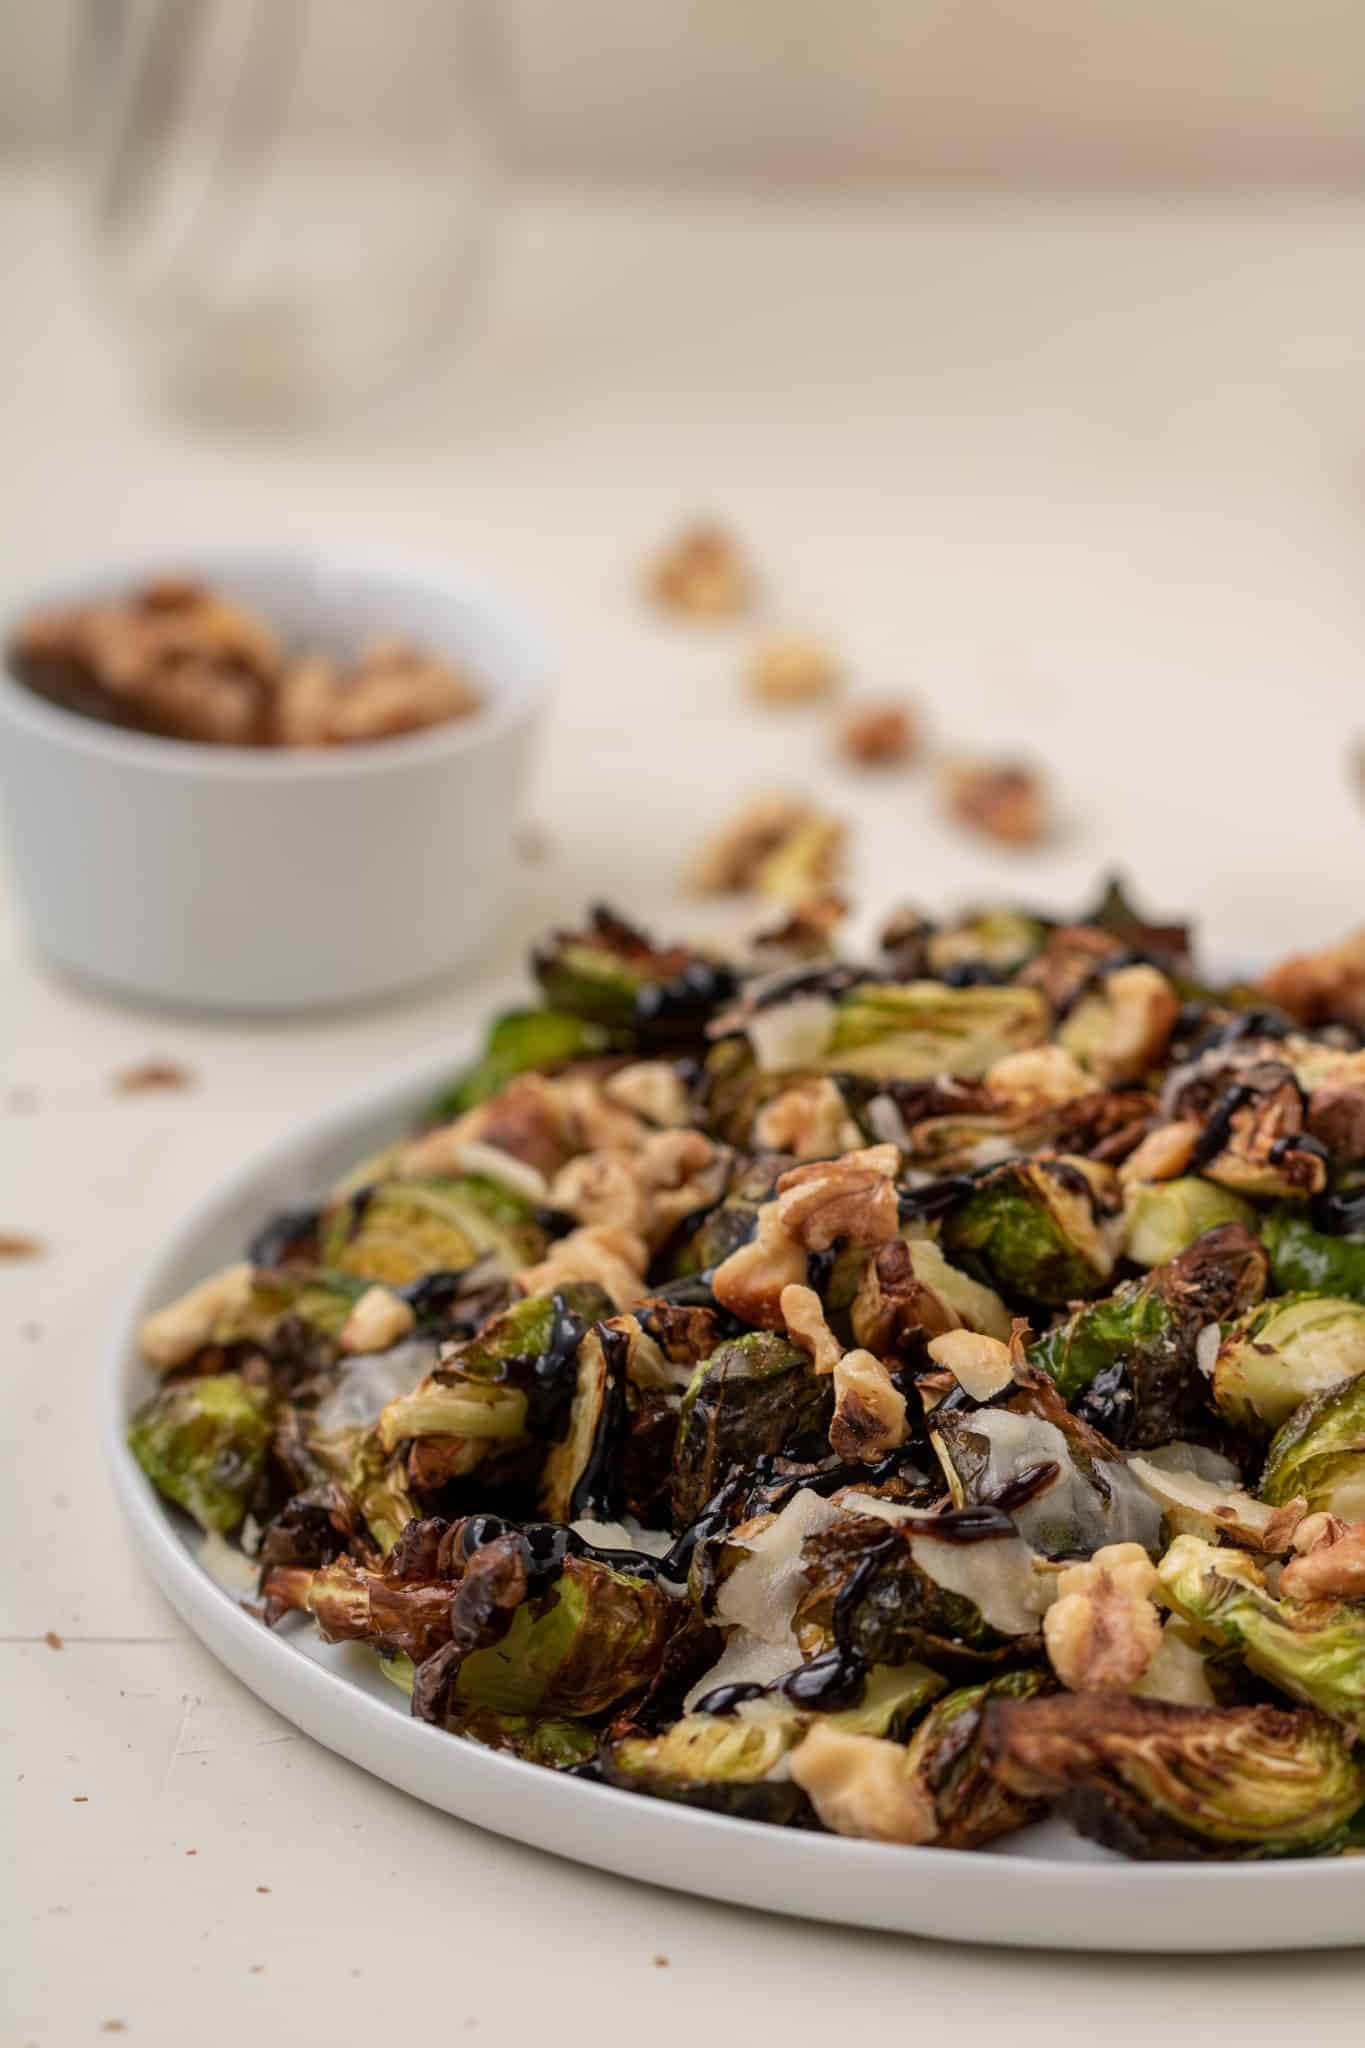 Air fryer brussel sprouts with balsamic glaze